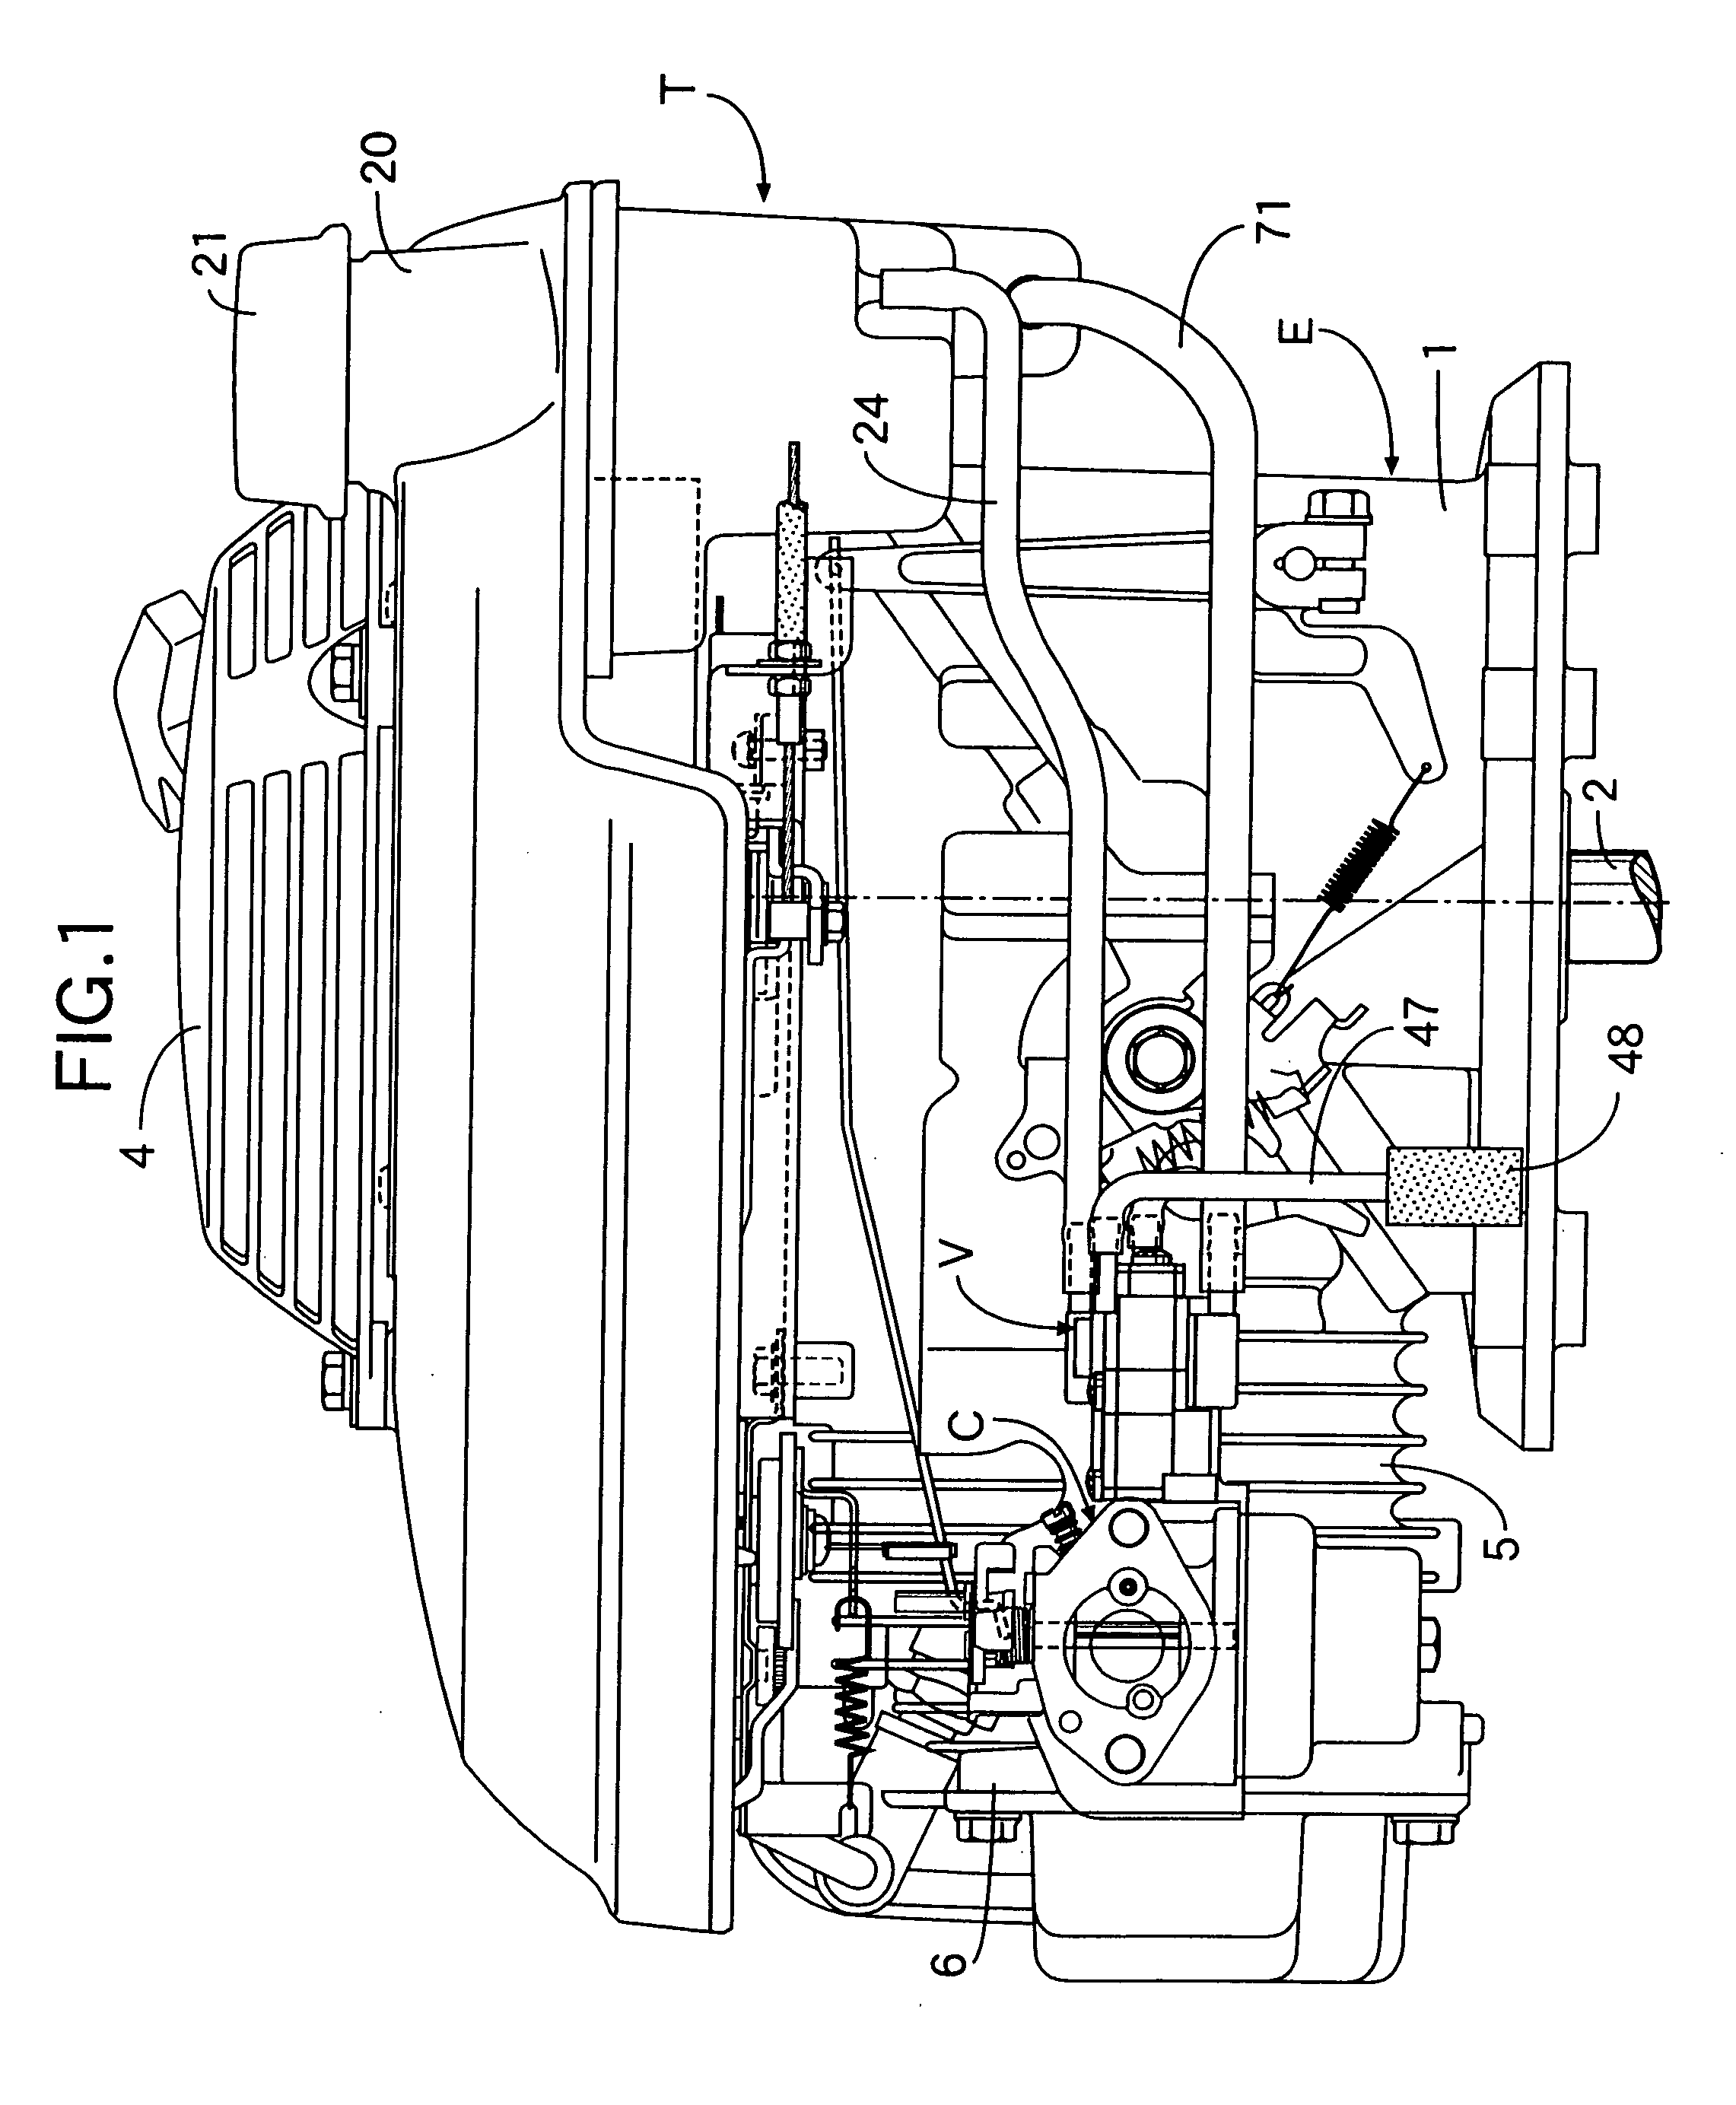 Fuel supply control system for engine